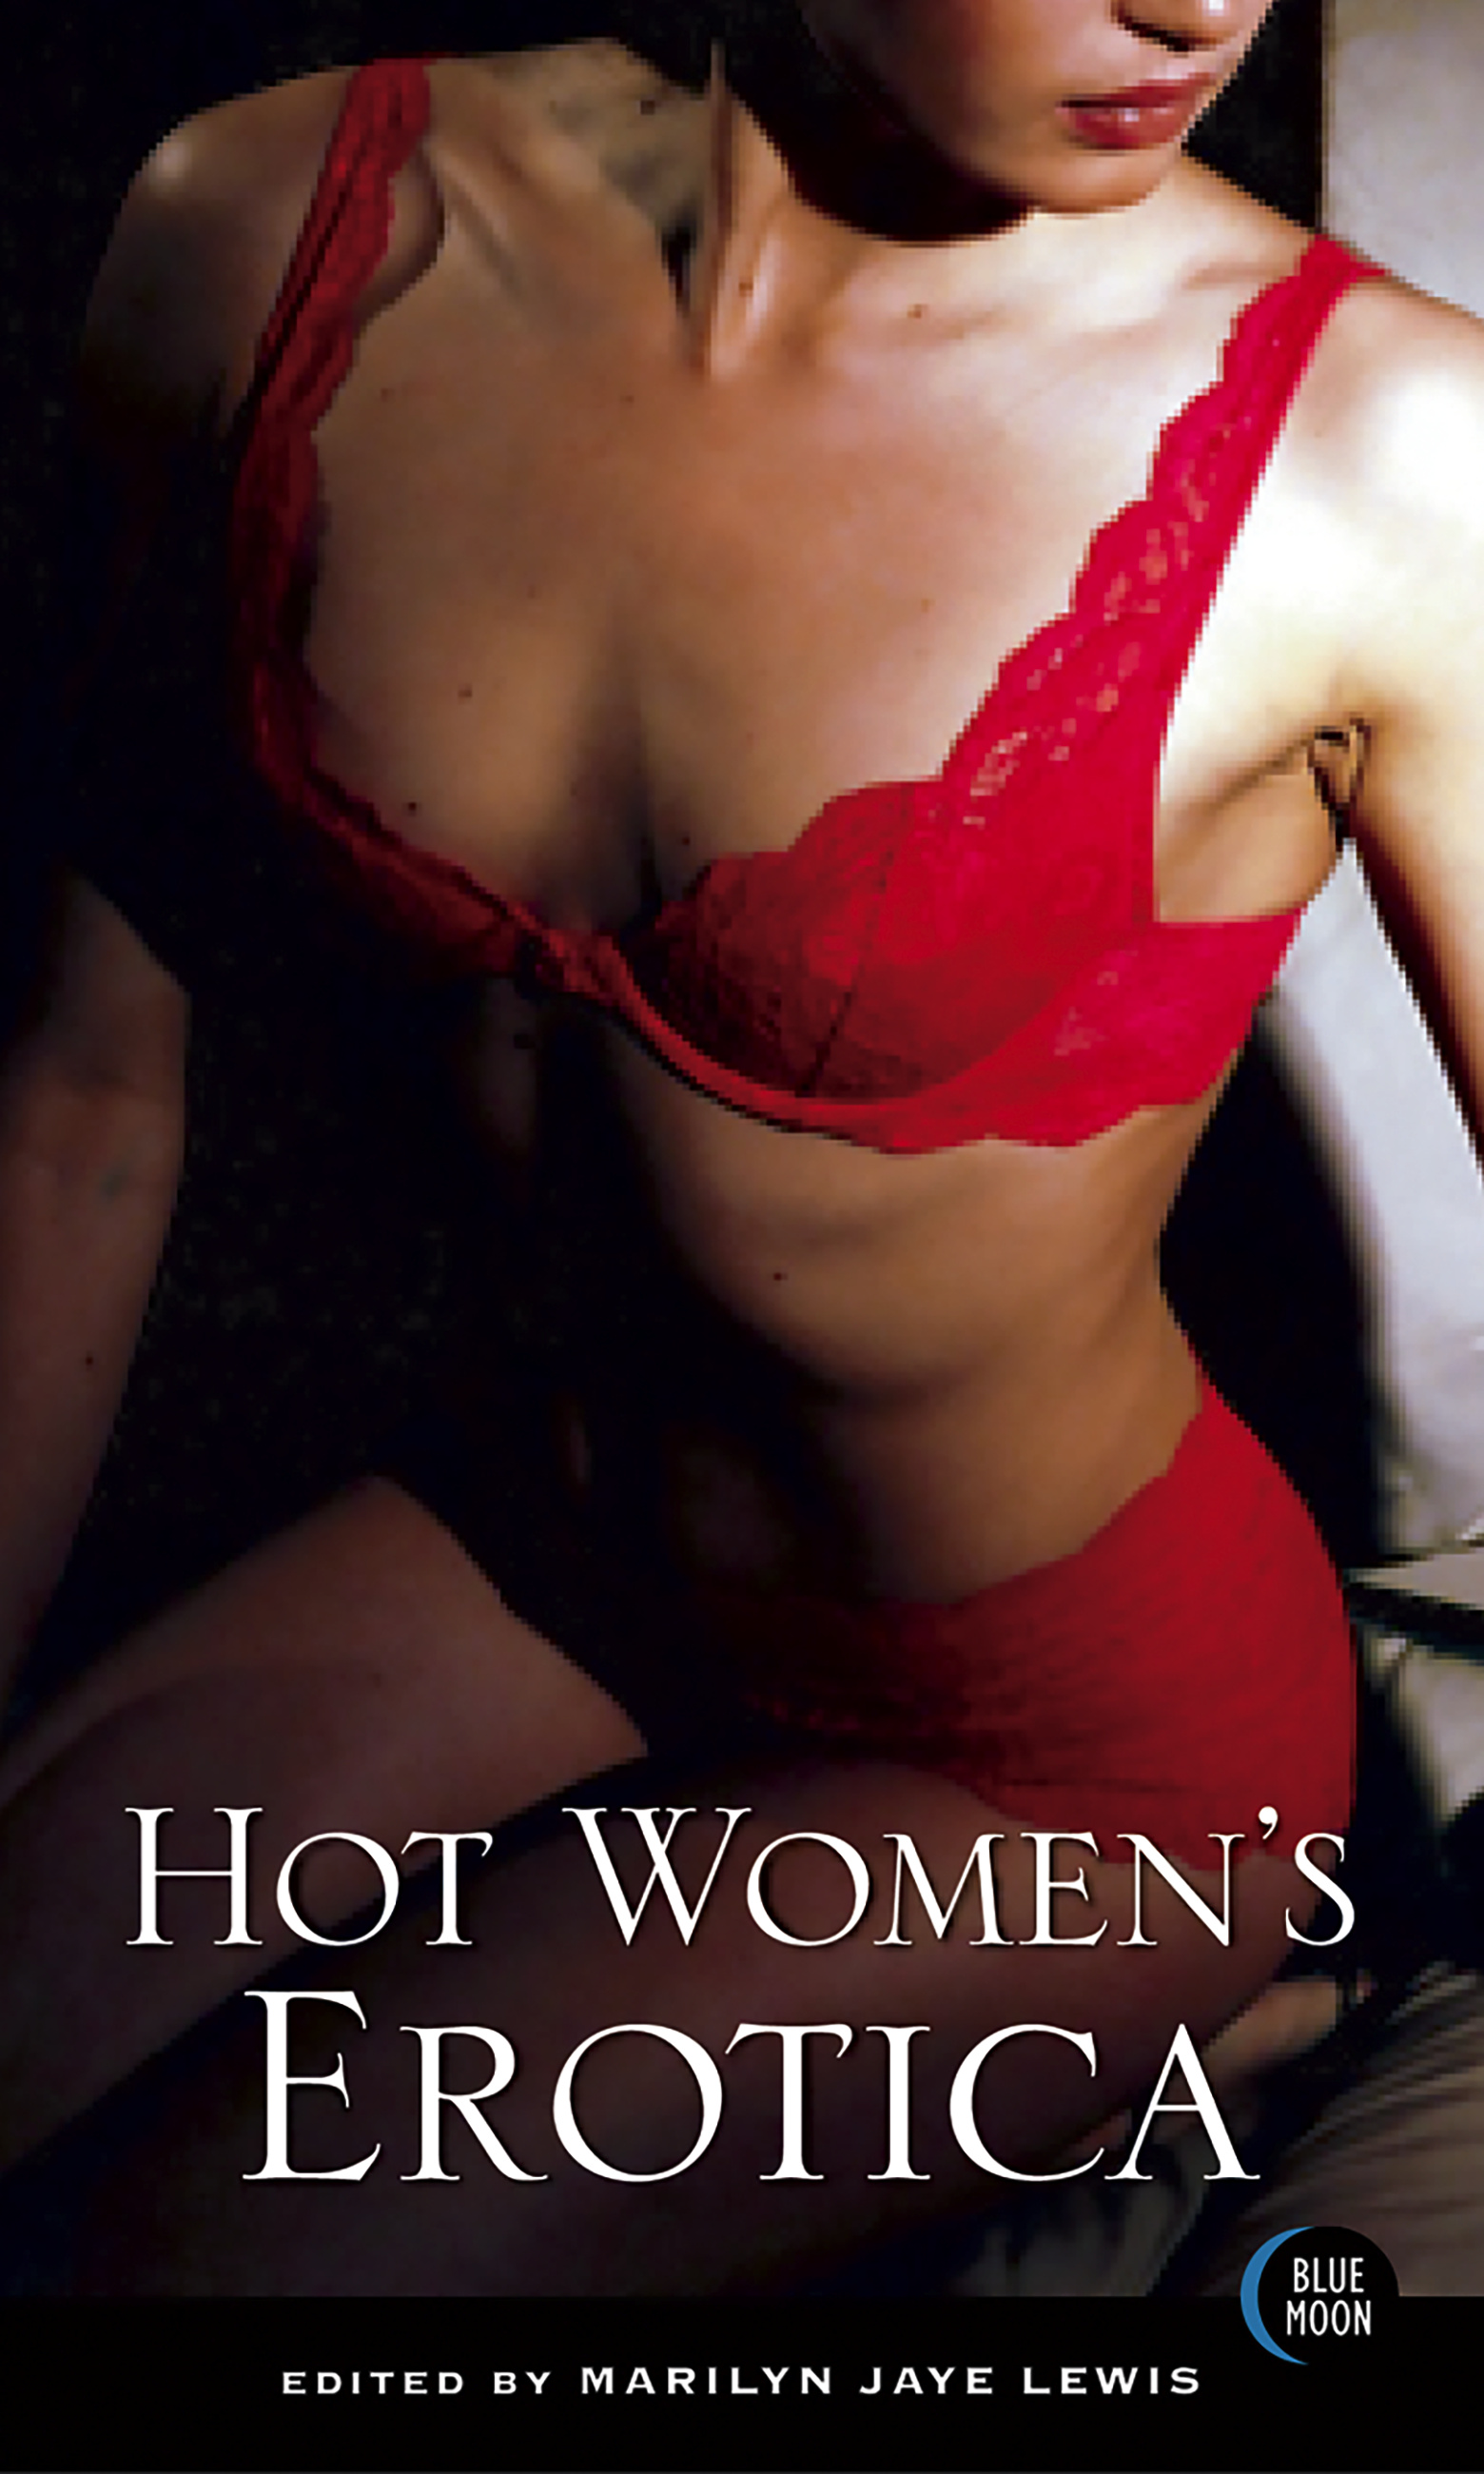 Hot Womens Erotica by Marilyn Jaye Lewis Hachette Book Group